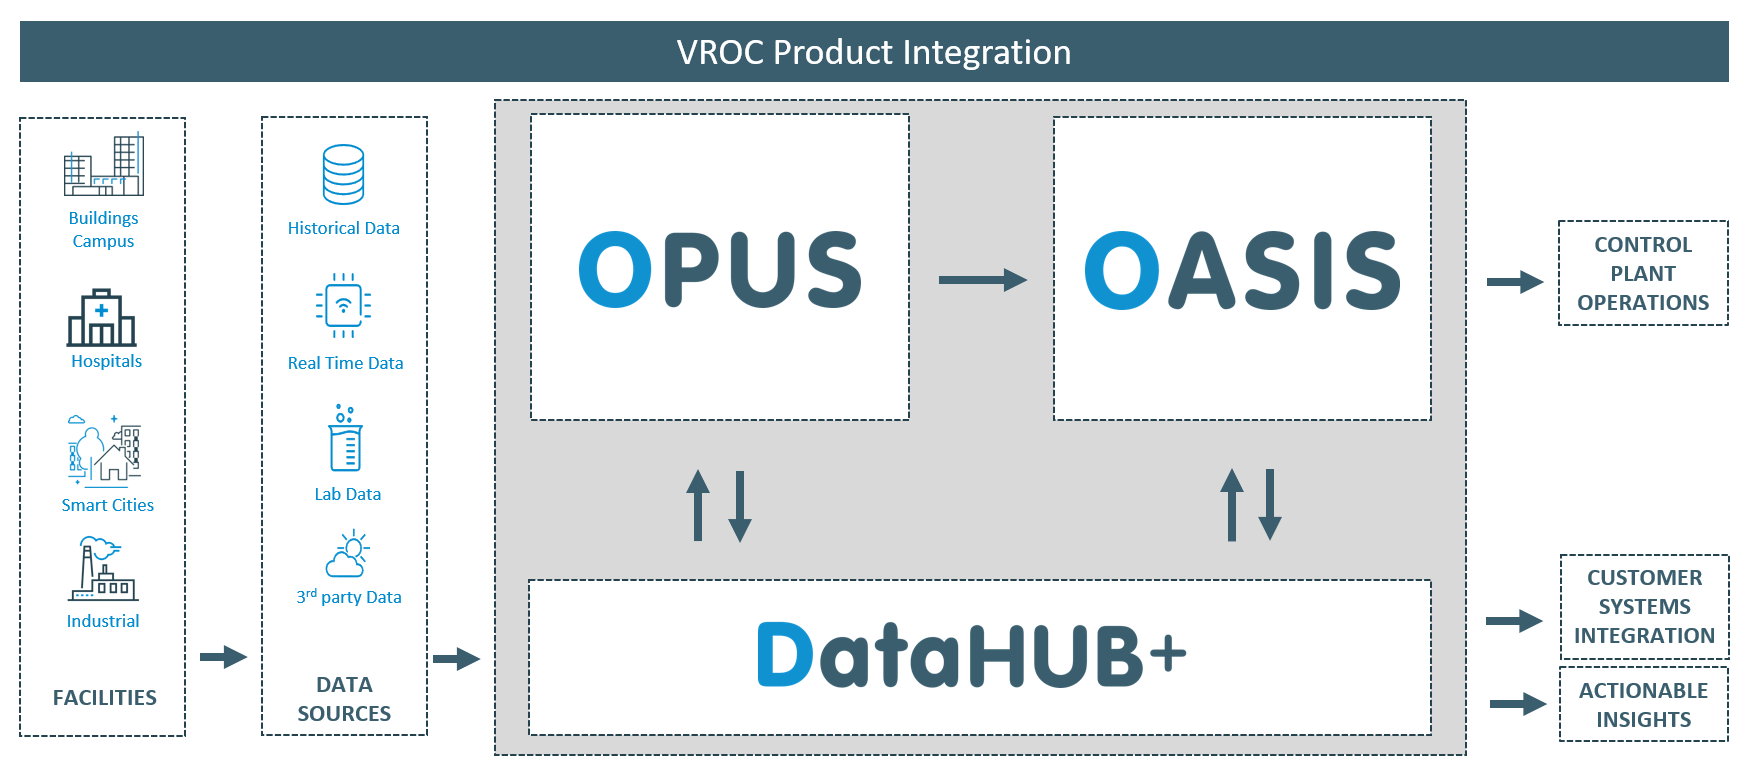 Diagram showing how VROC's products integrate with one-another, and how data flows into and out of the ecosystem